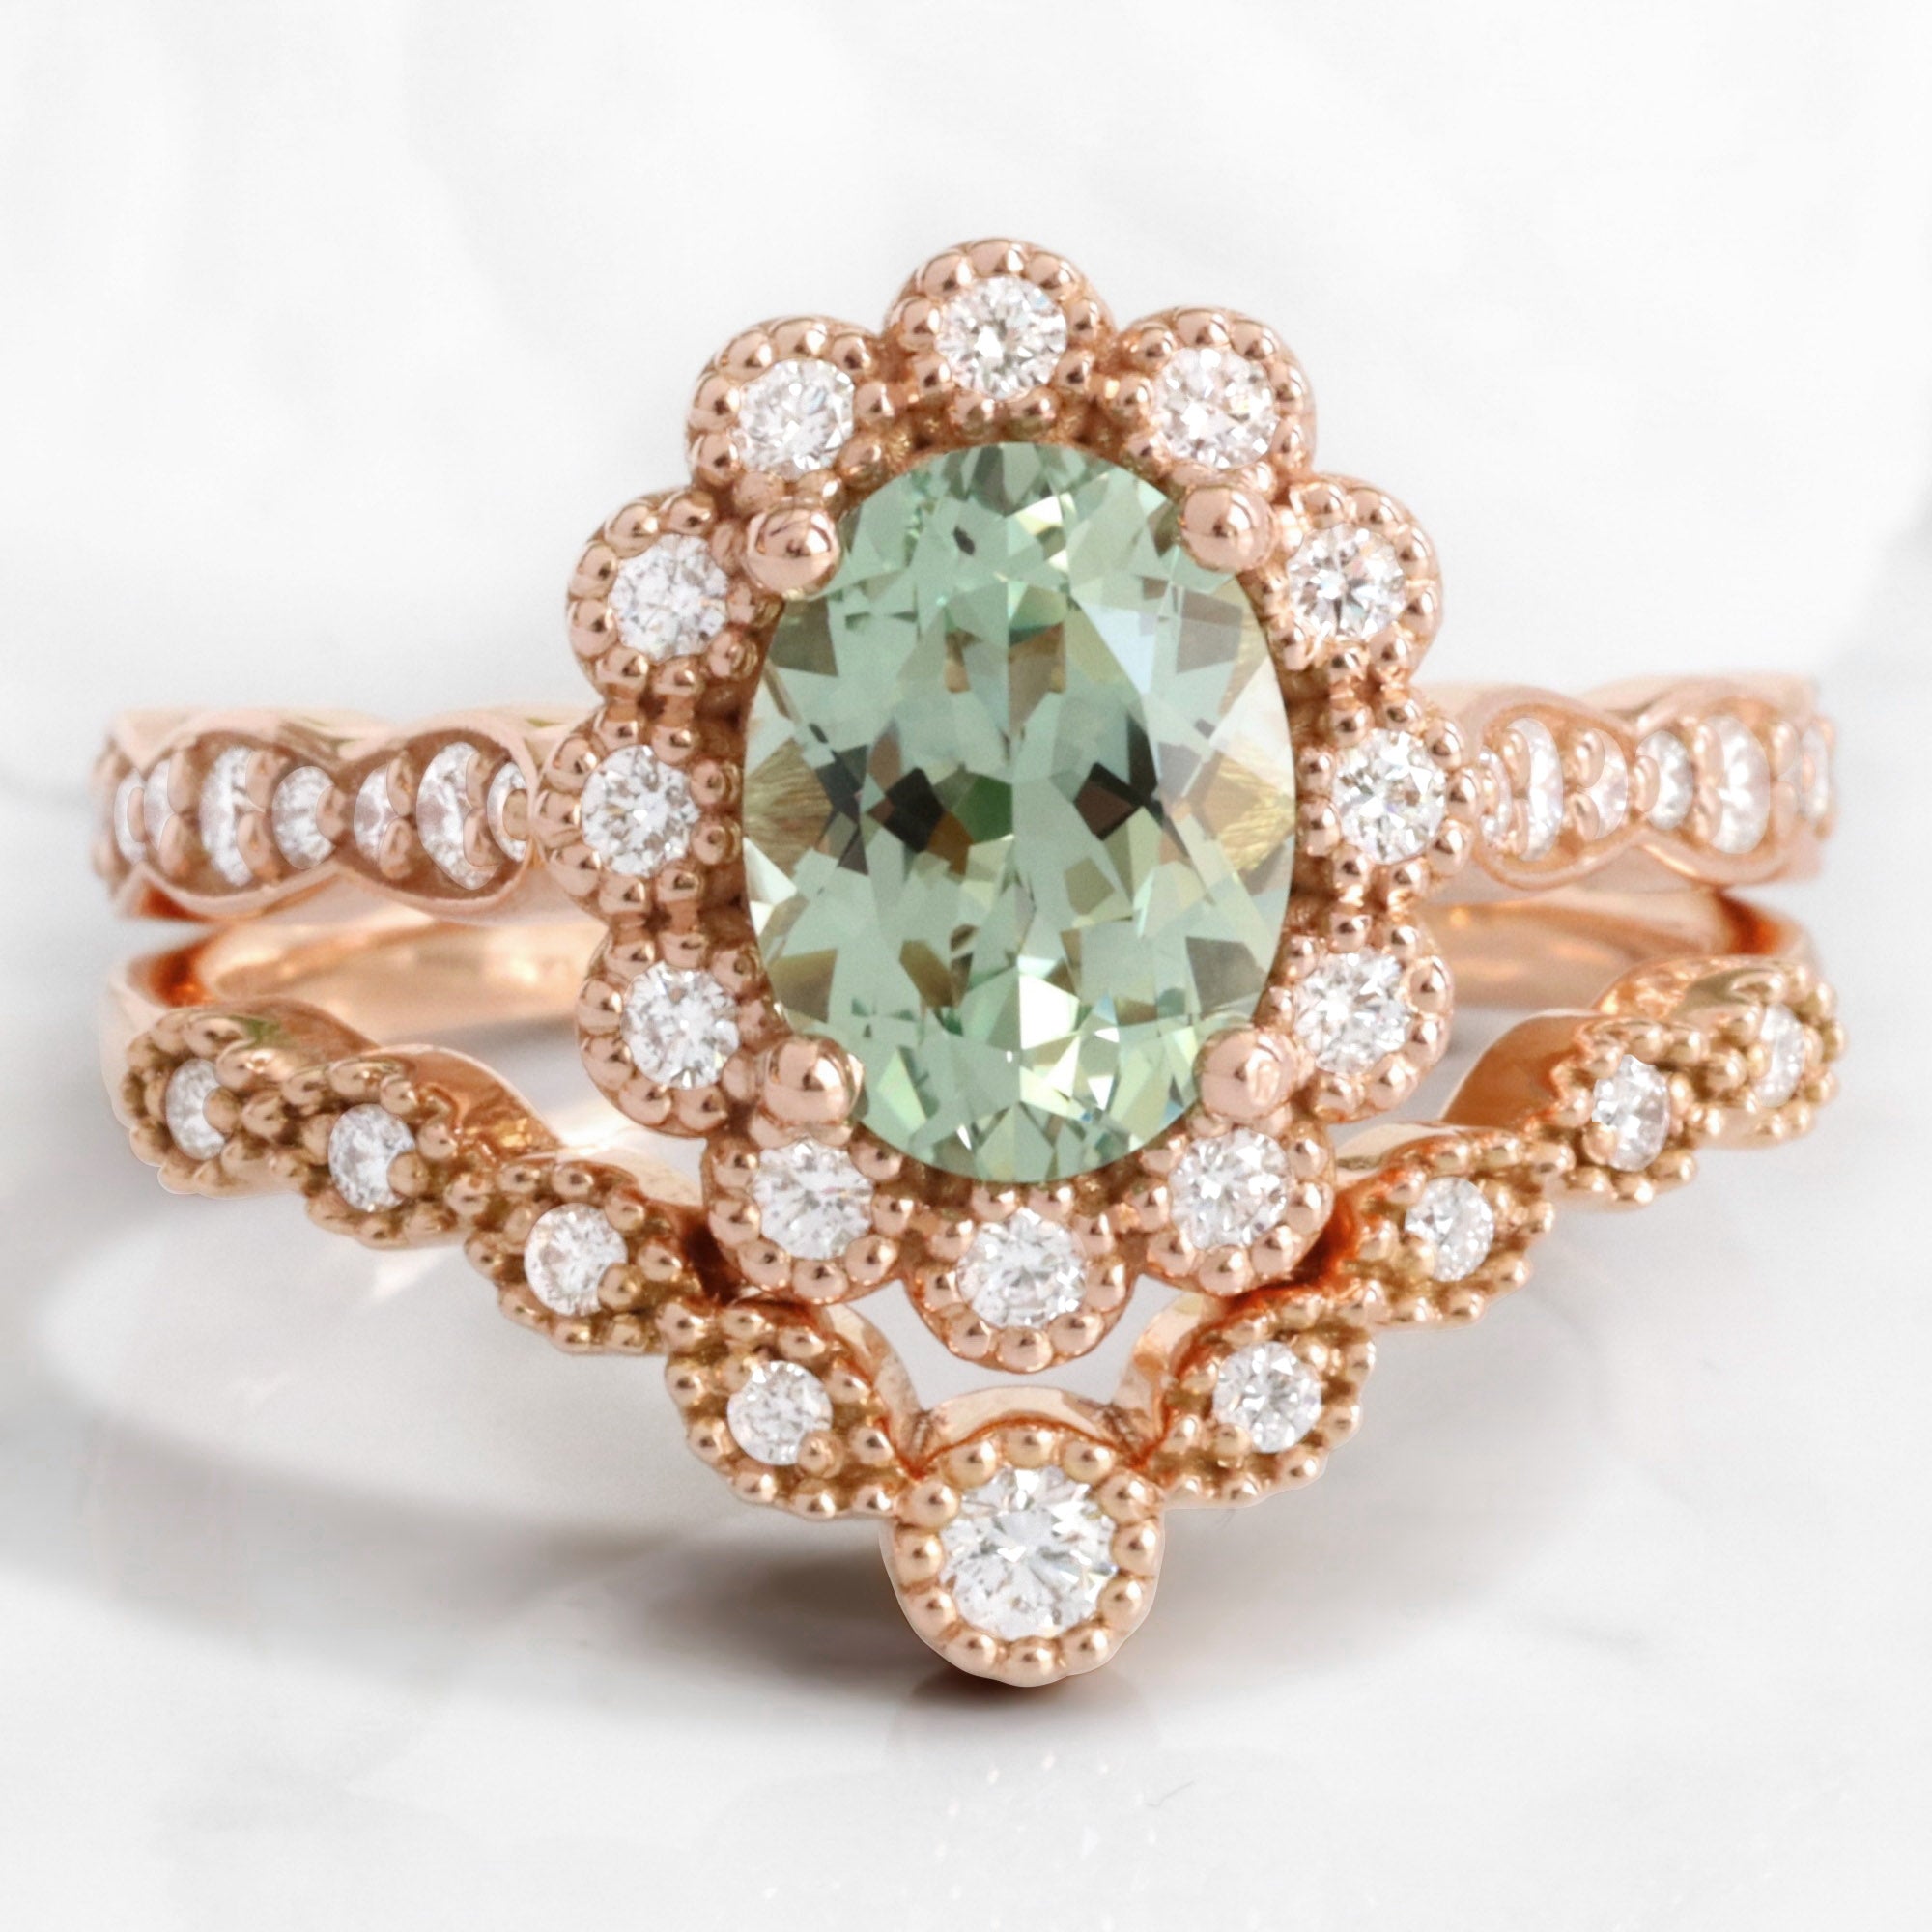 Vintage style green sapphire ring bridal set rose gold curved diamond wedding ring stack la more design jewelry